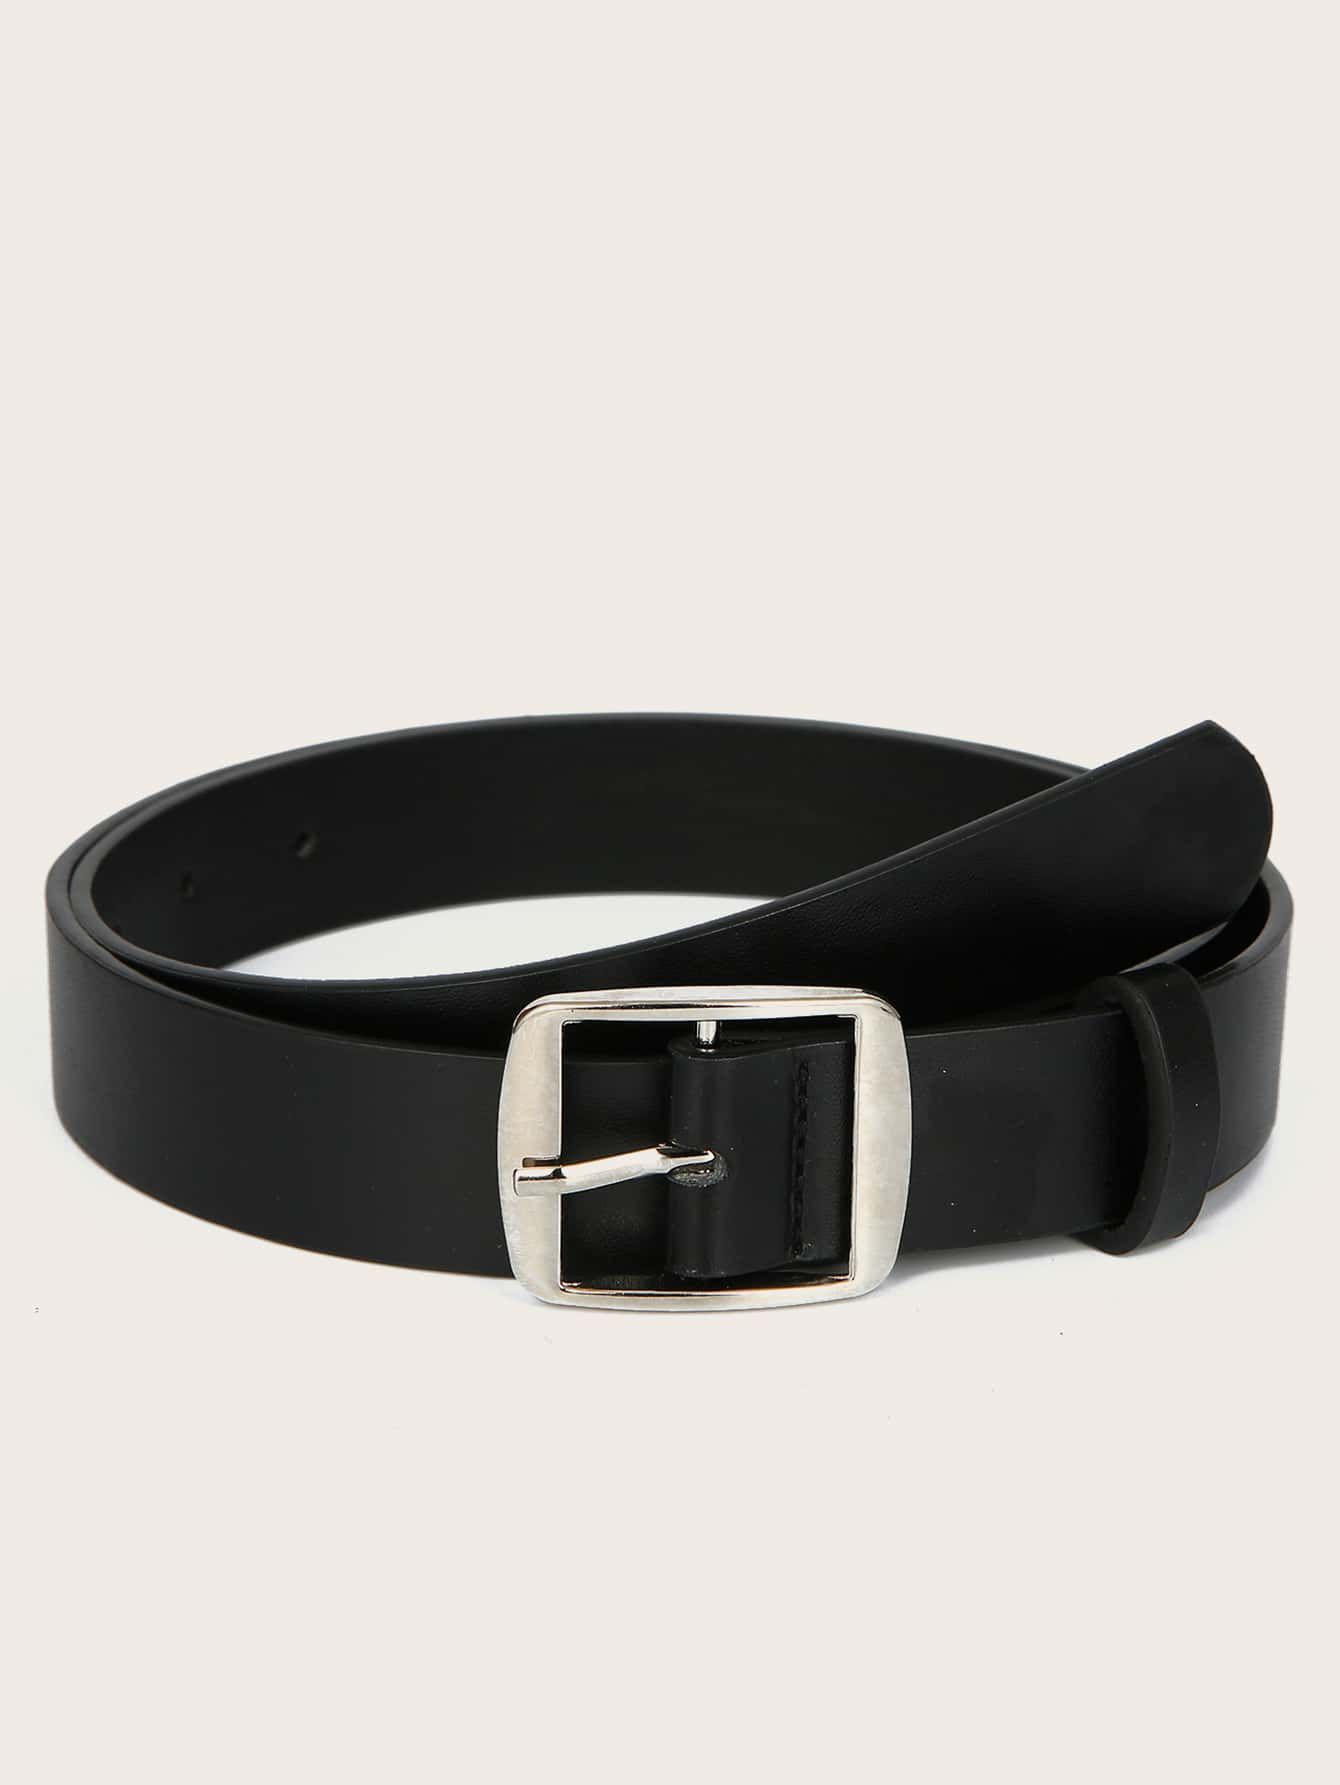 Accessorize with Flair: Complete Your Look with Belts for Women